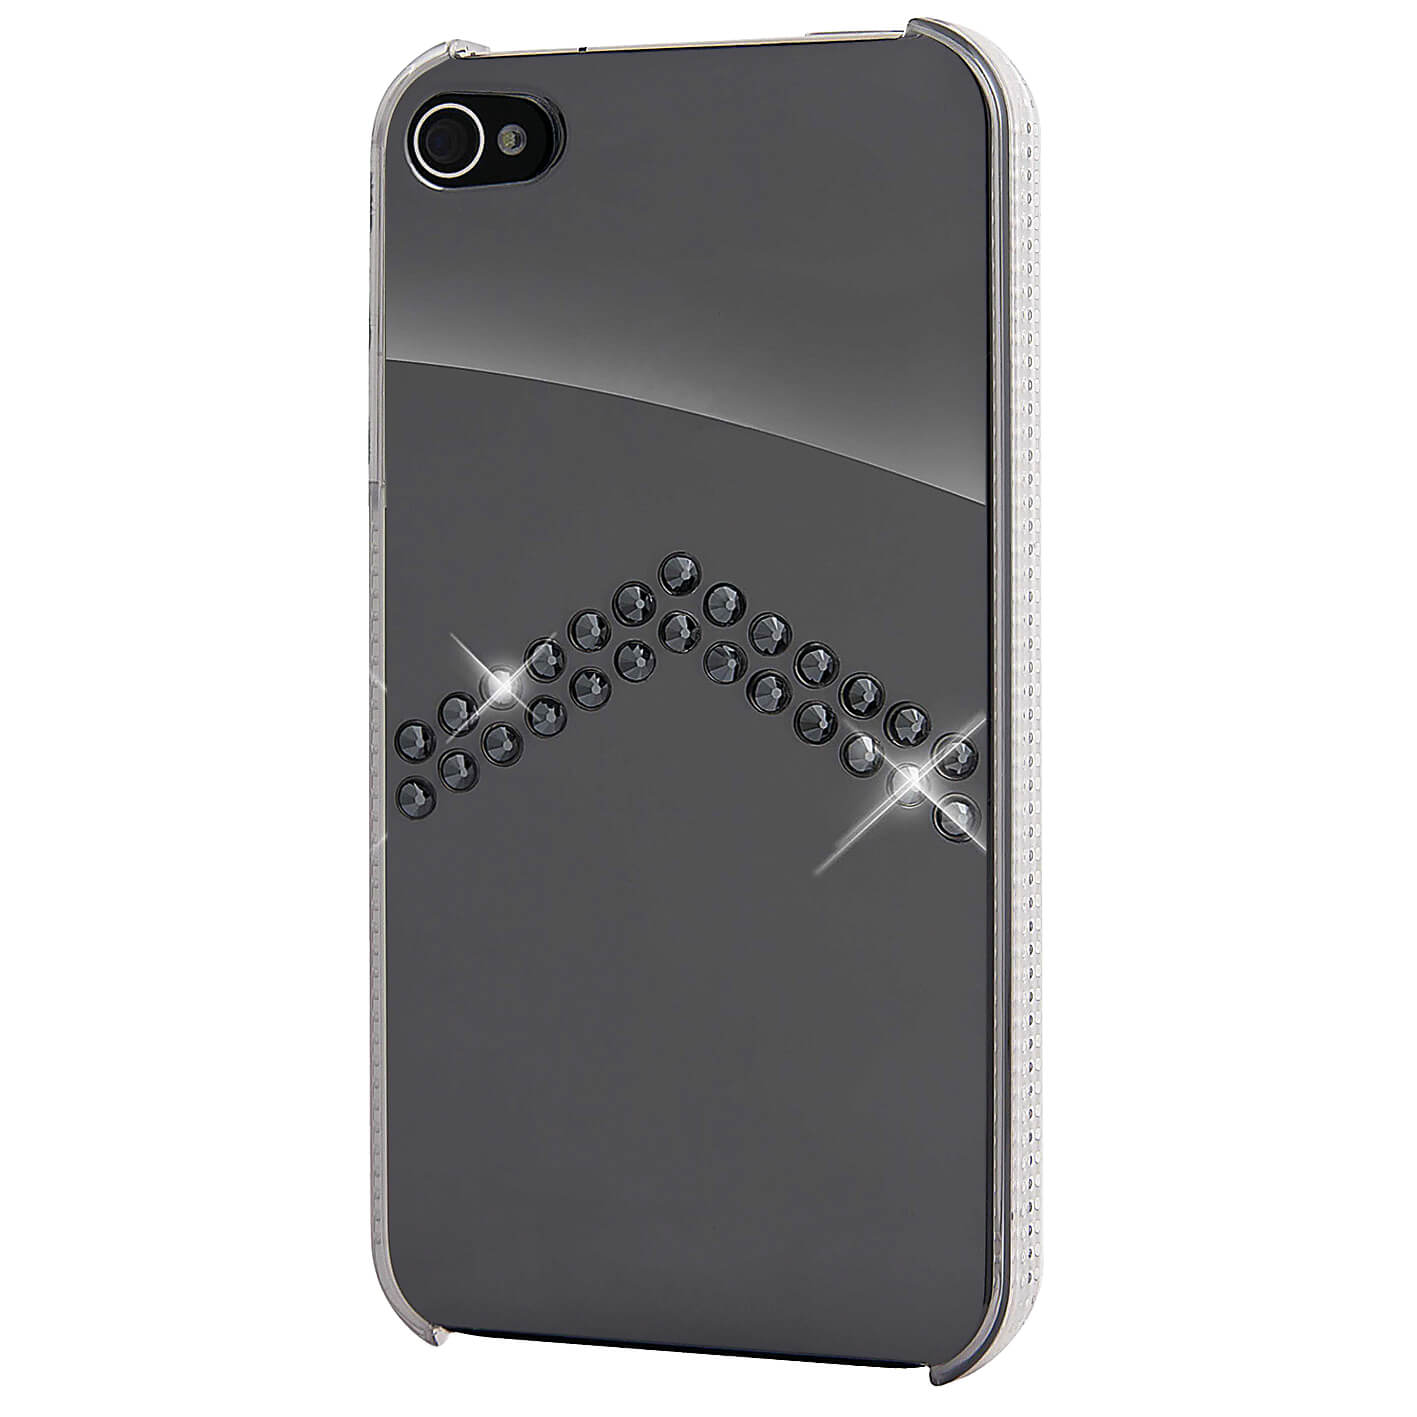 Arrow Mobile Phone Cover for Apple iPhone 4/4S, chrome